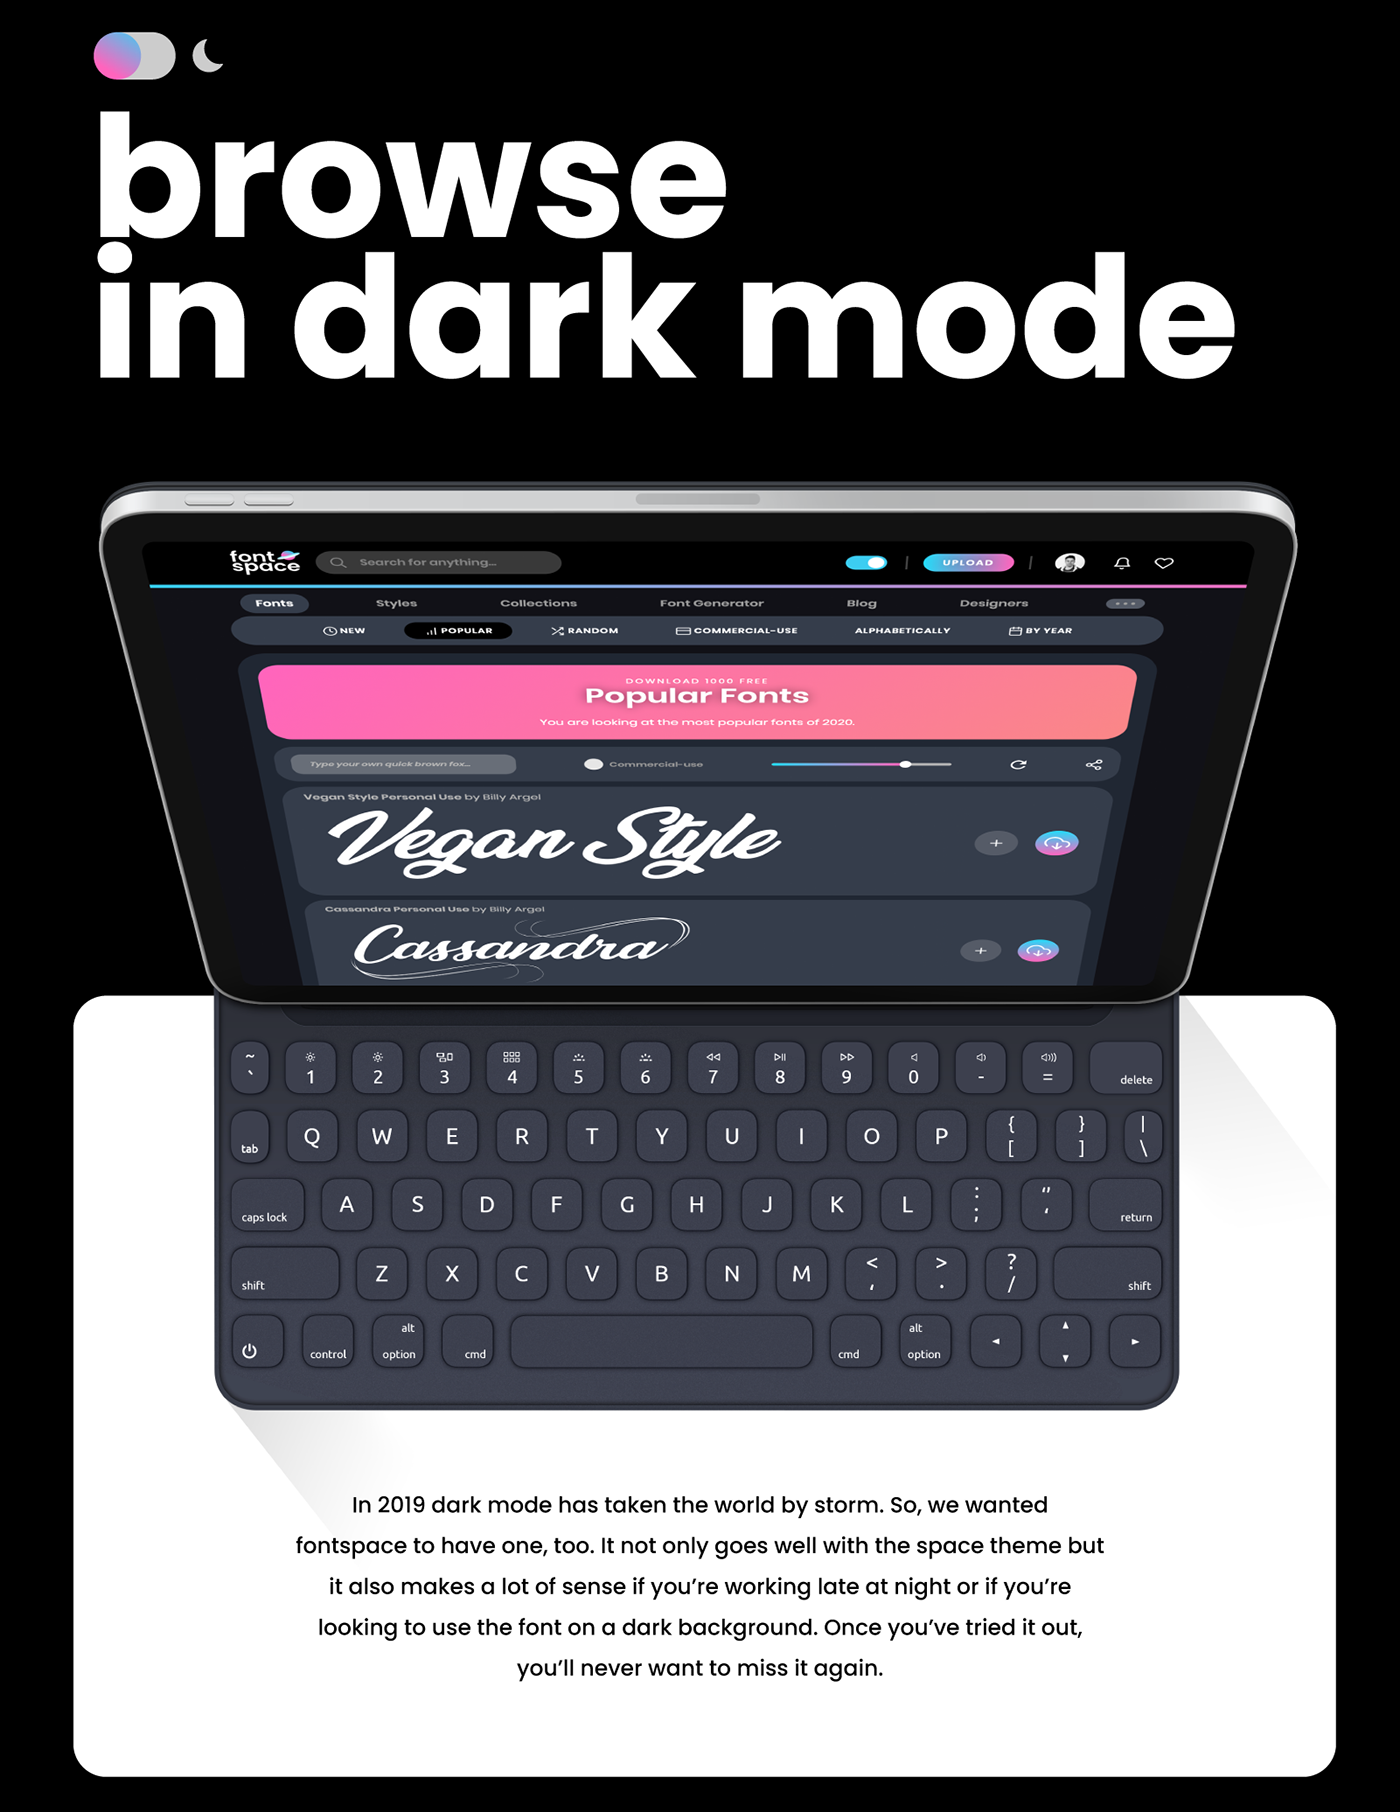 fonts fontspace free rebranding redesign browse collections dark mode branding  ui design